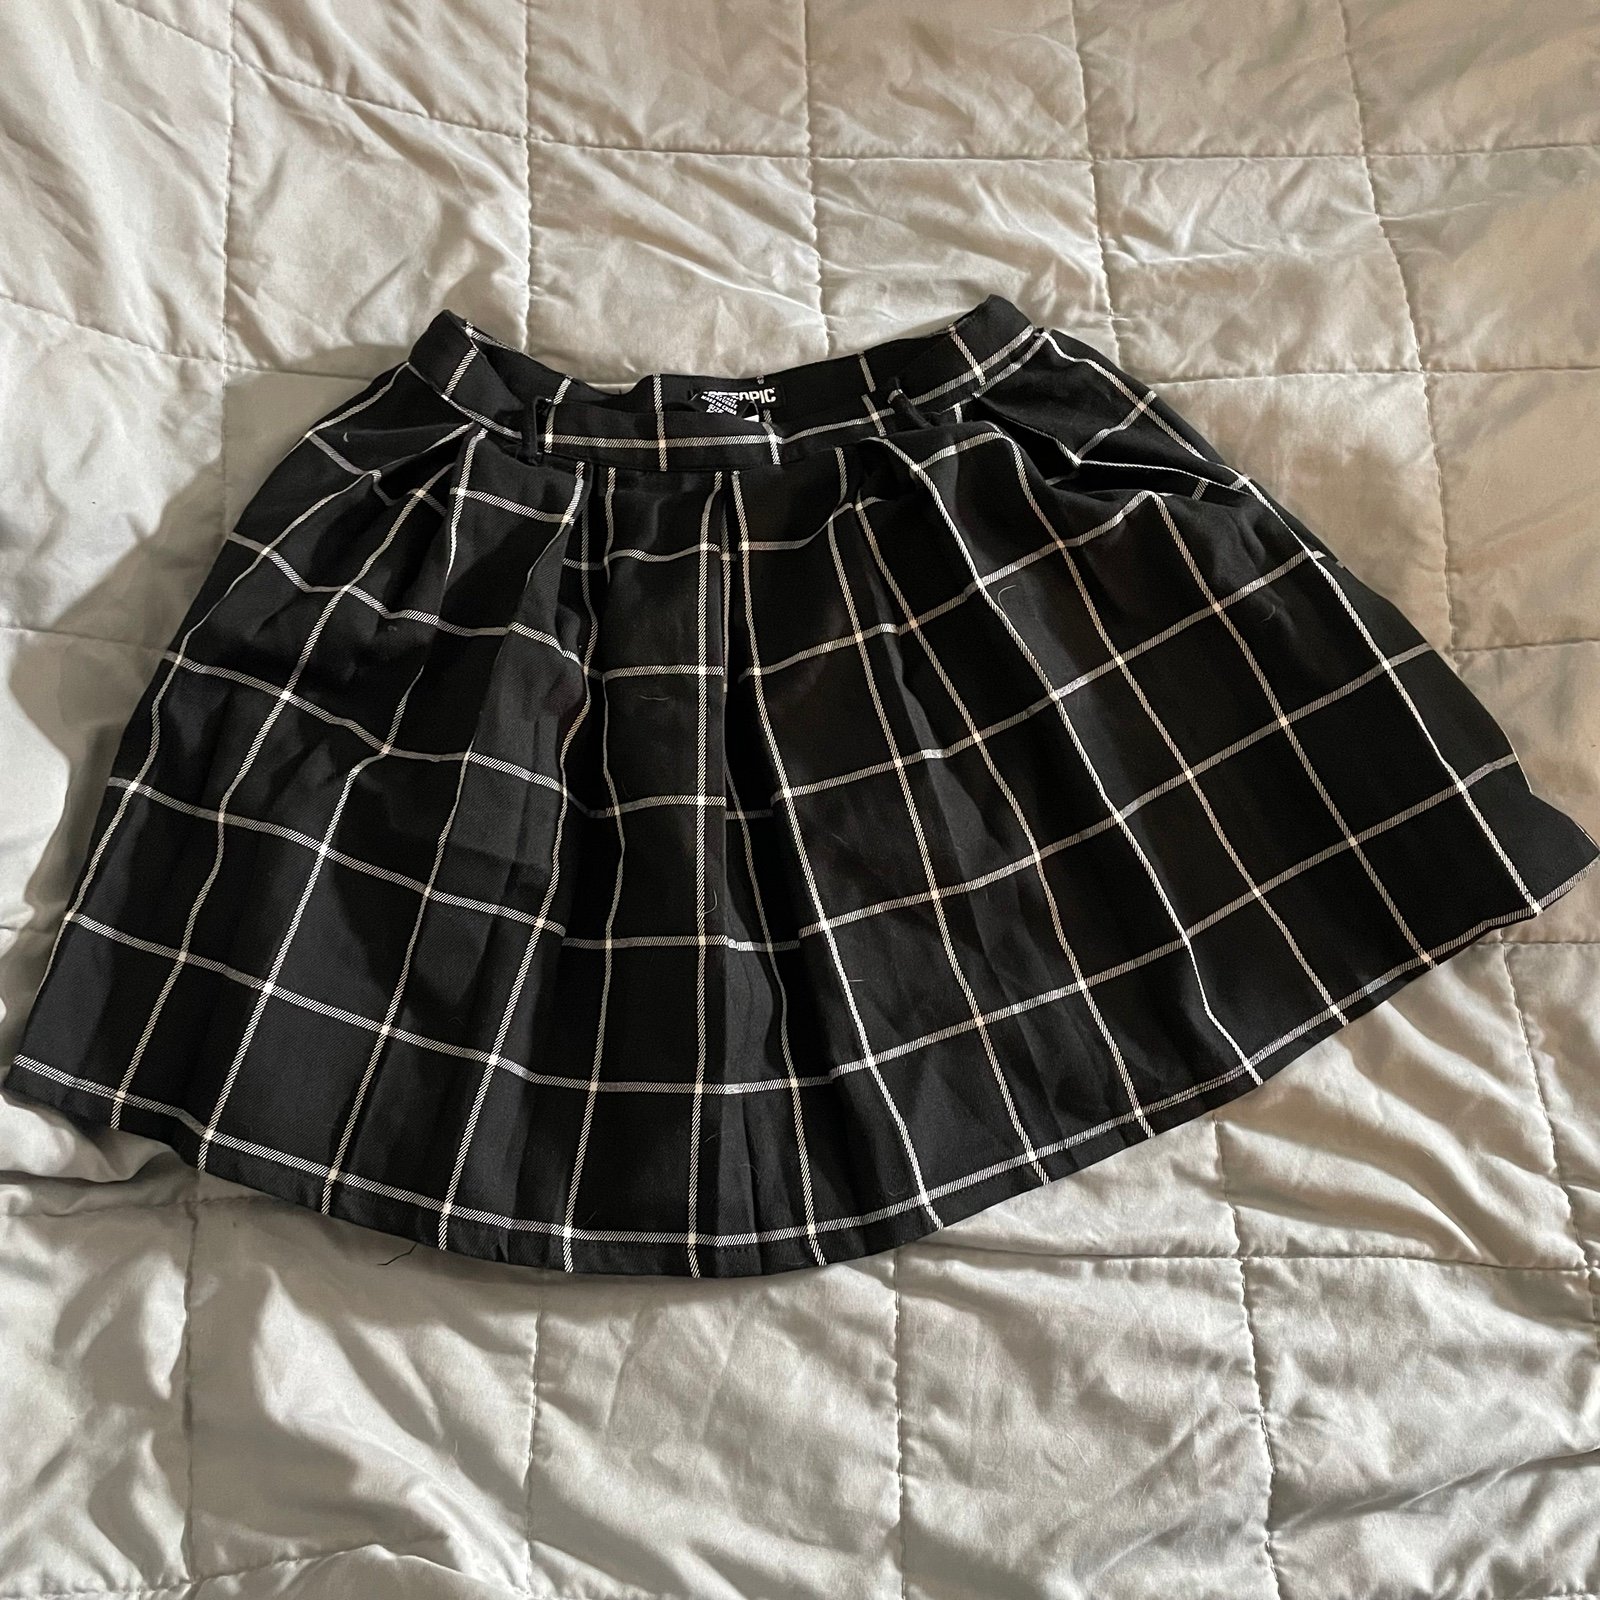 save up to 70% hot topic plaid skirt hzQH2PDaA Everyday Low Prices